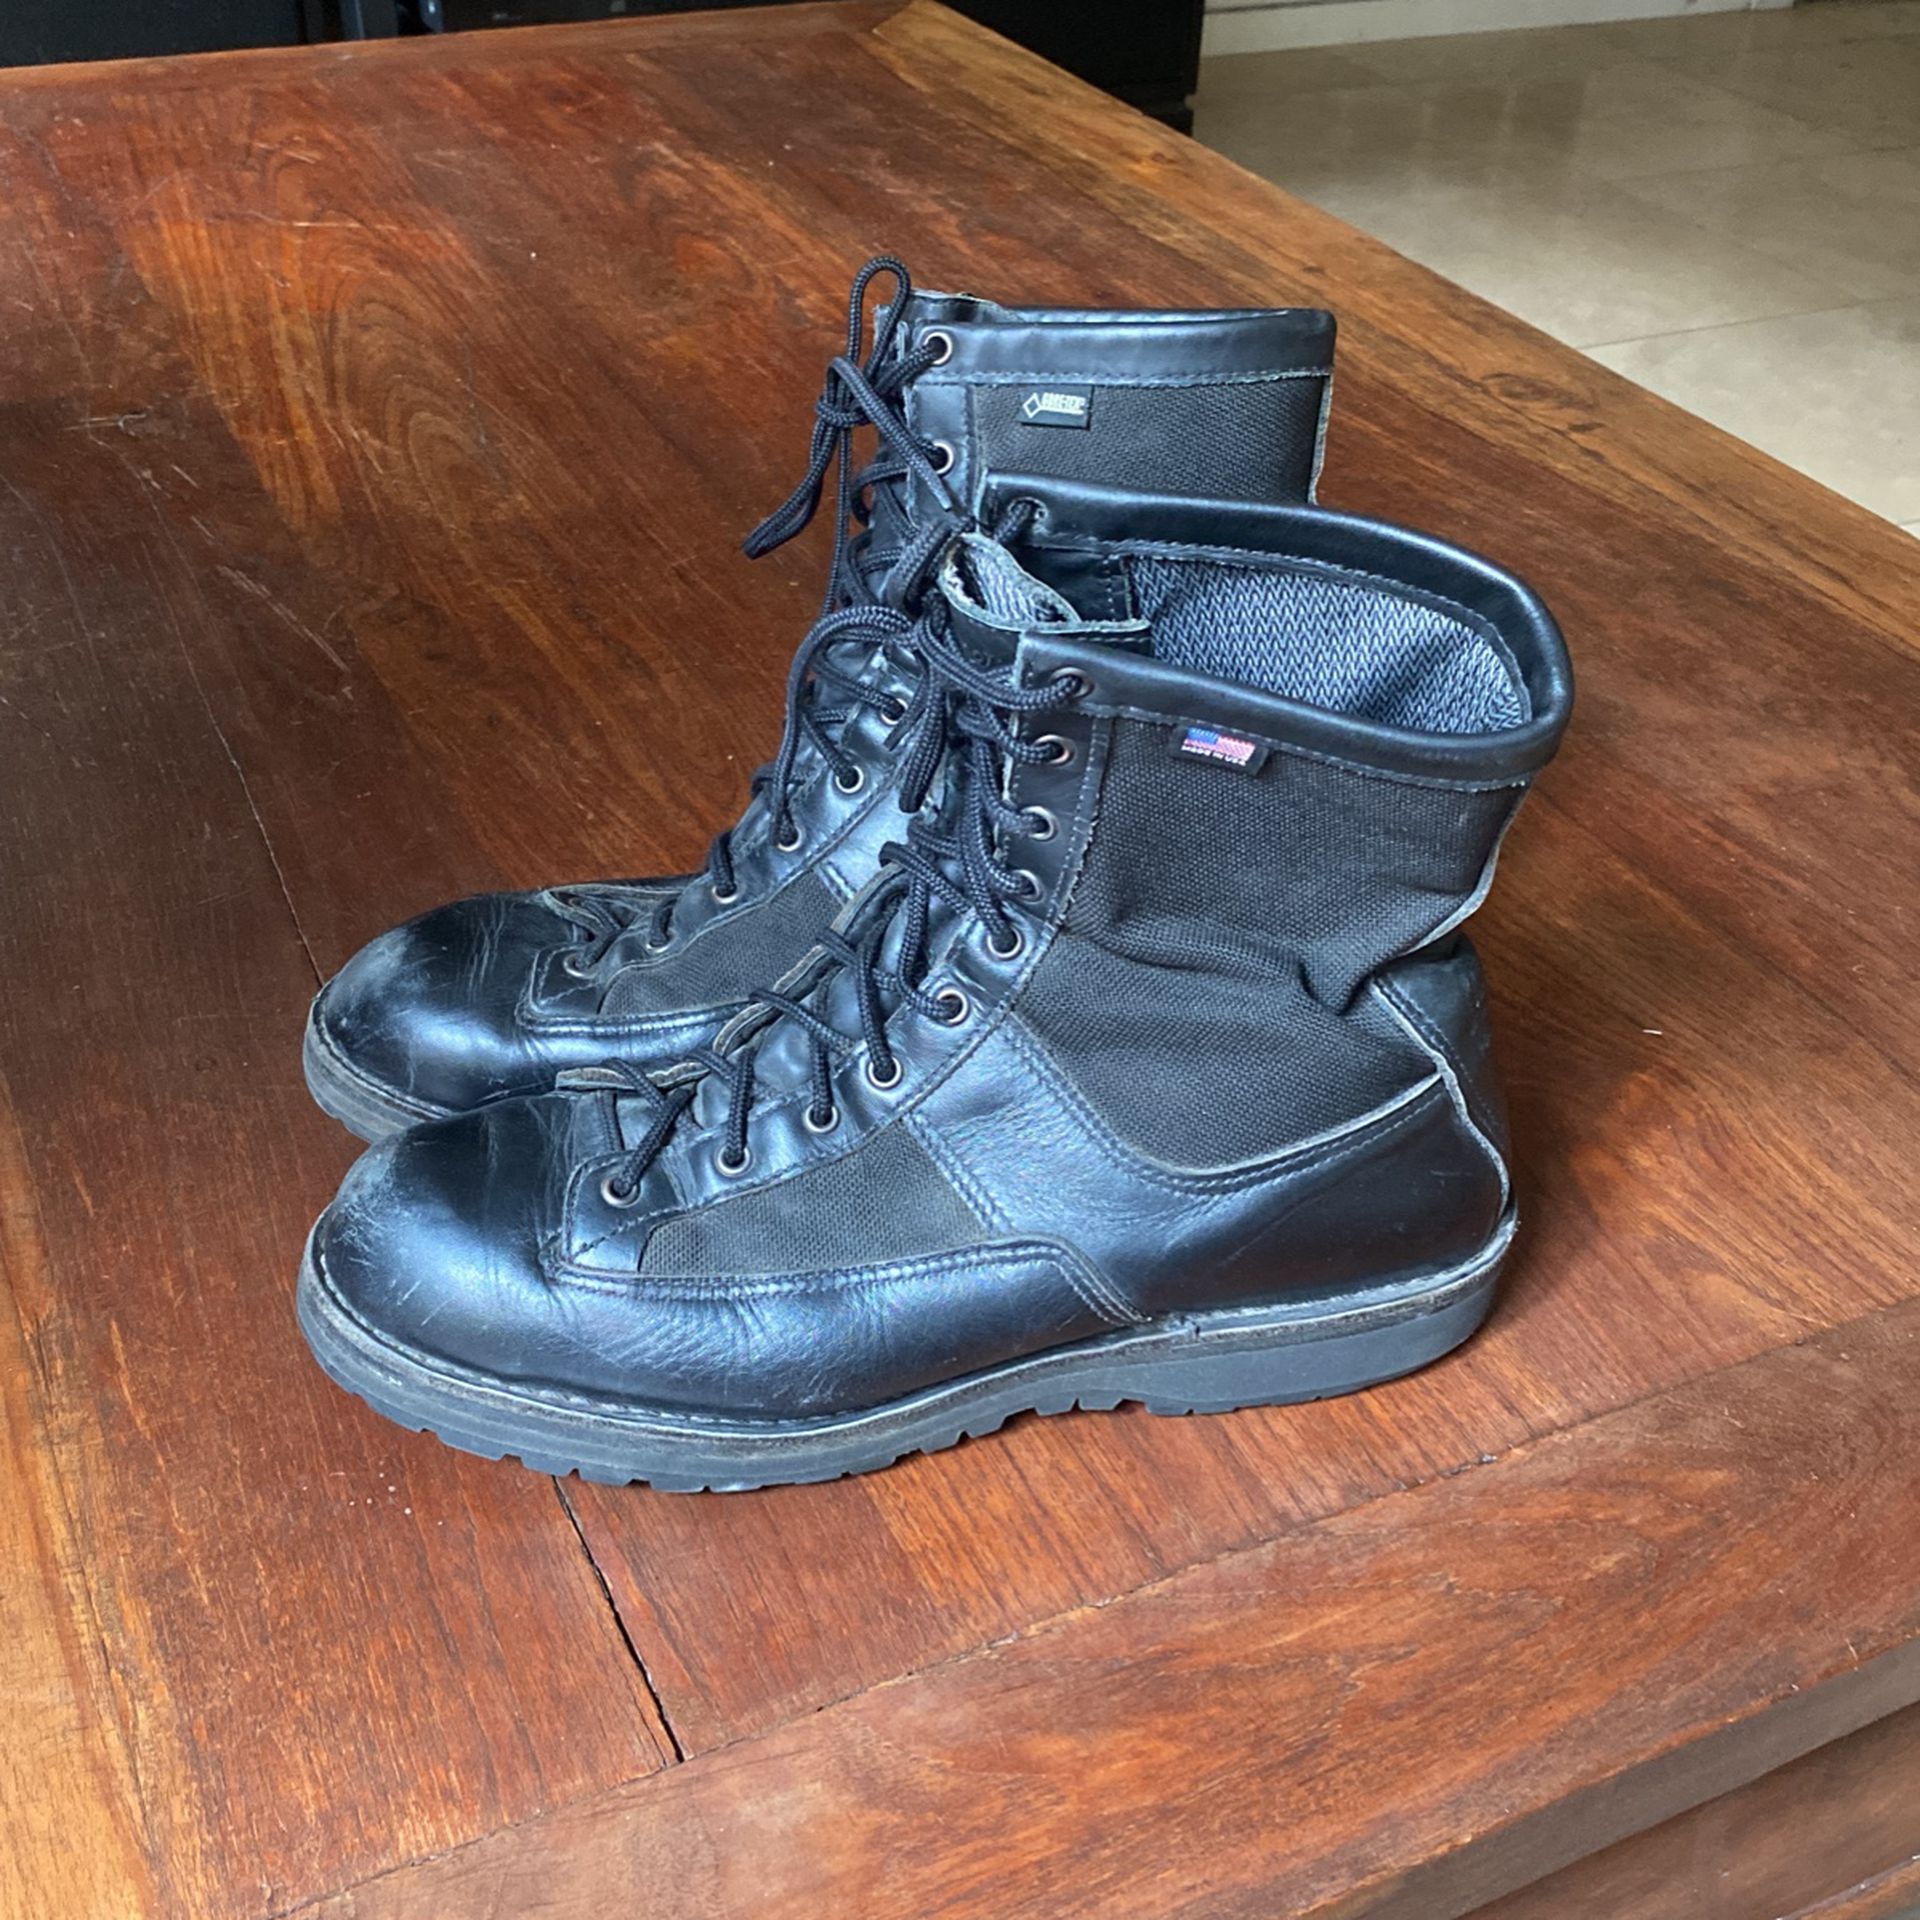 Danner Work Boots Size 12.